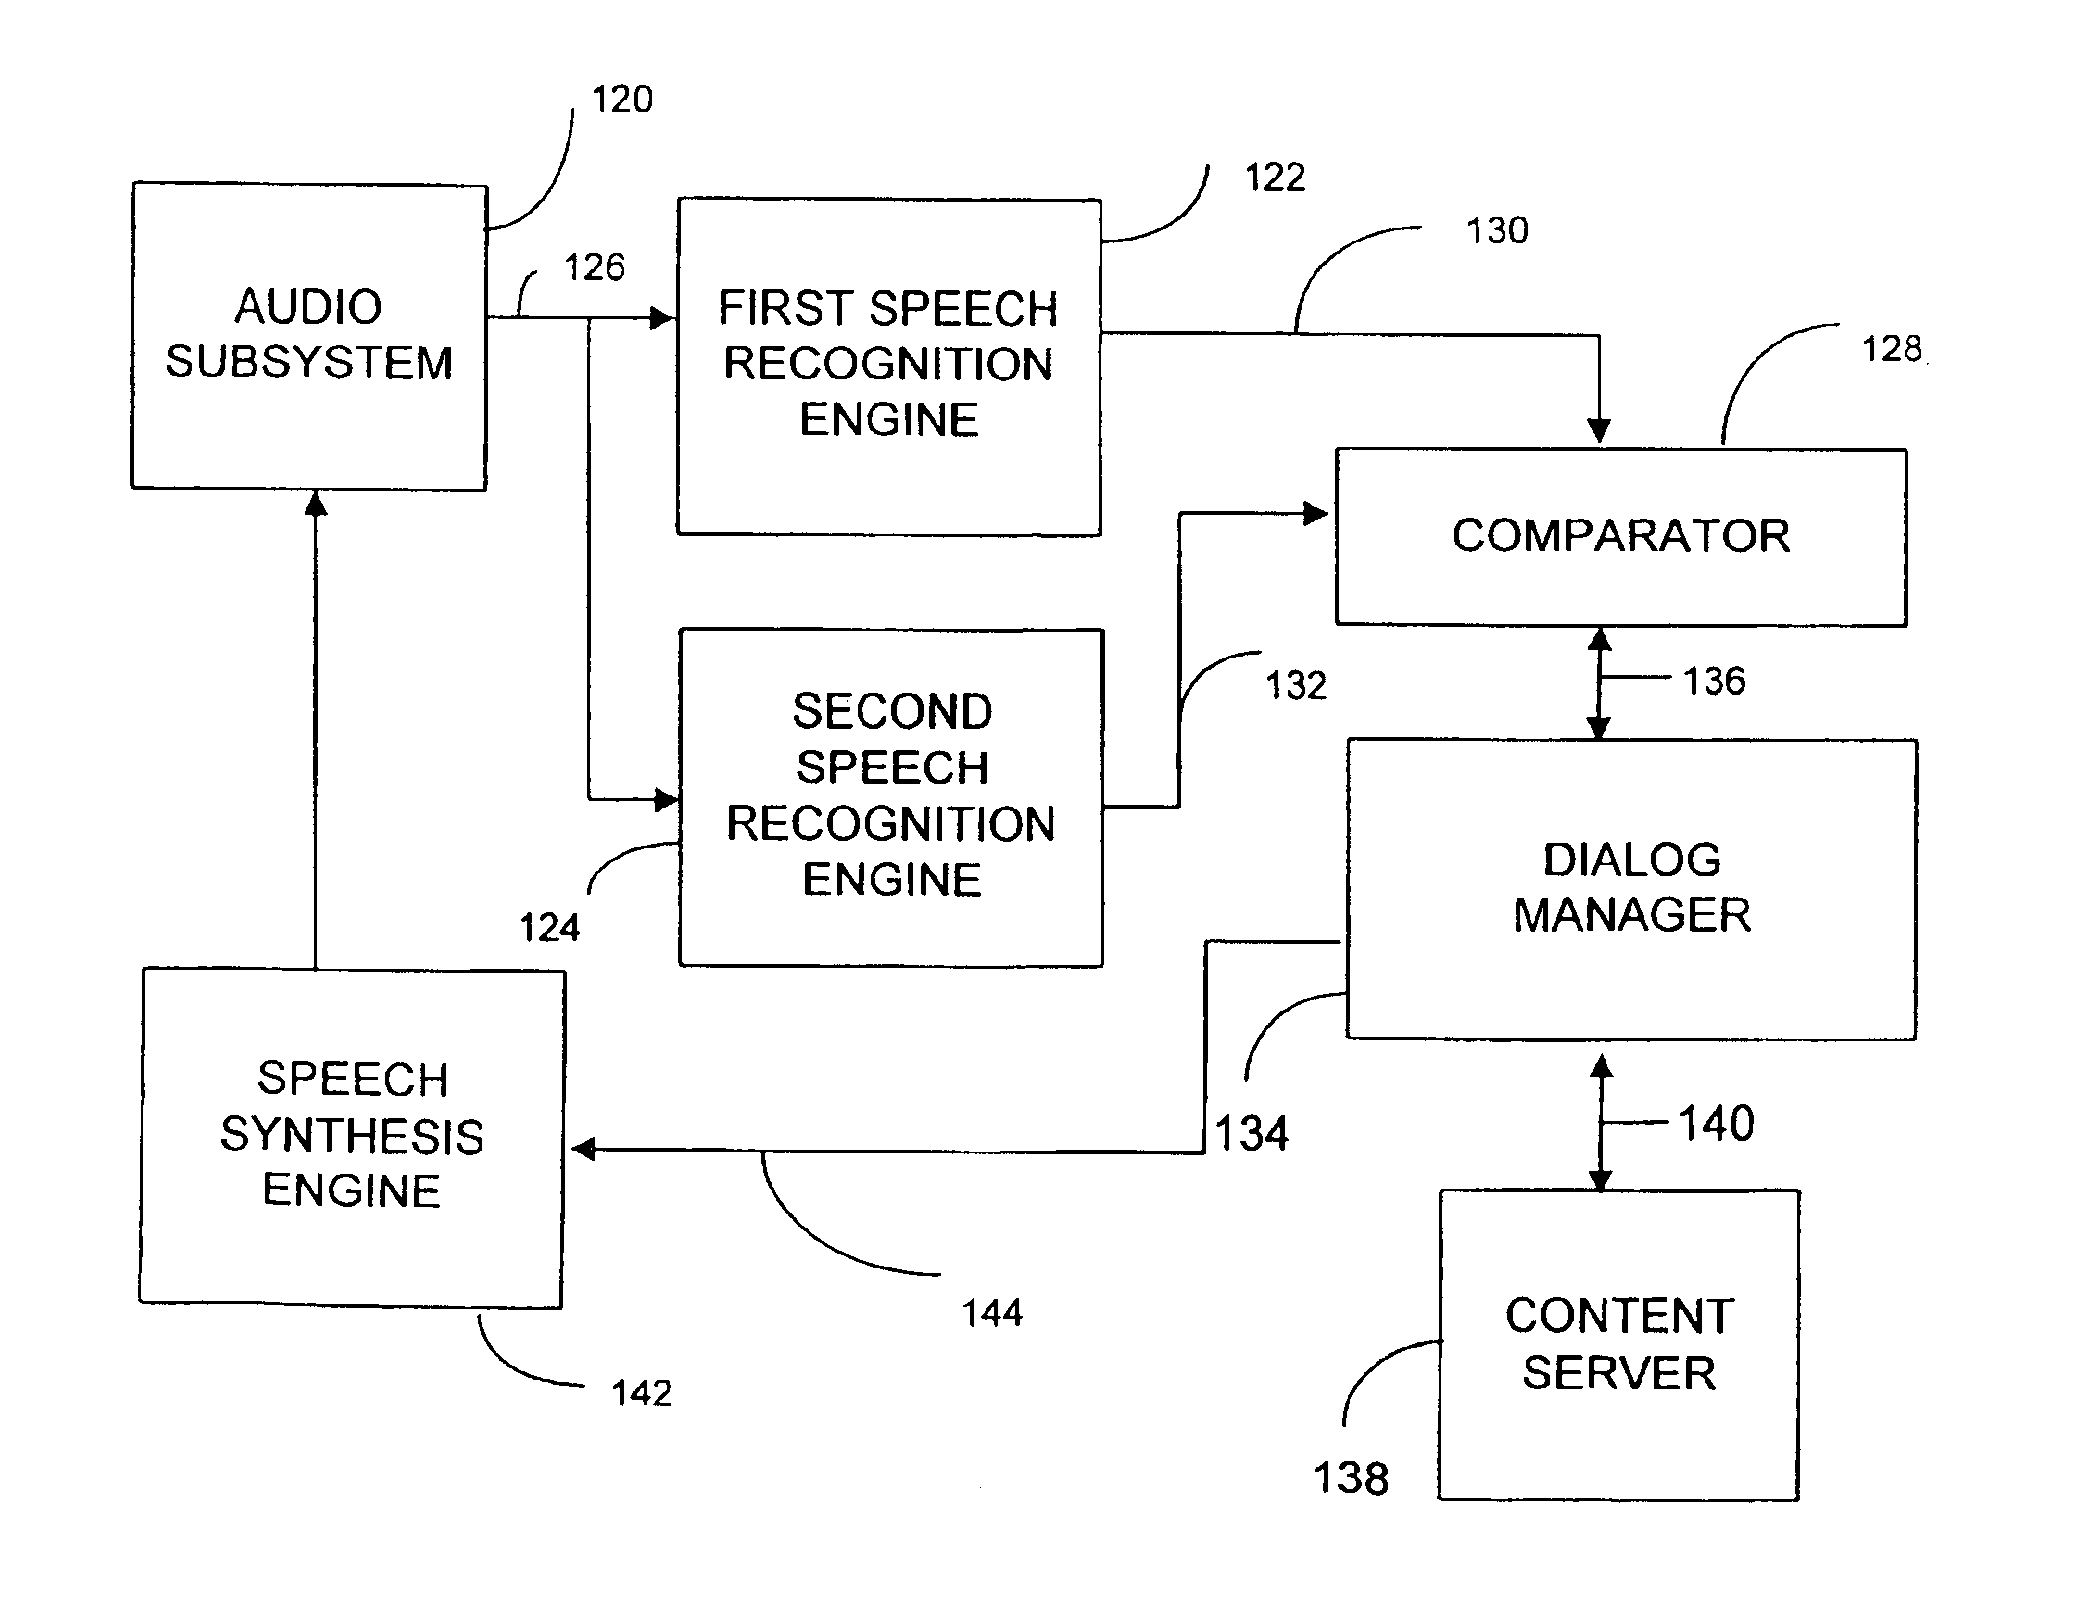 Method and apparatus for multi-level distributed speech recognition